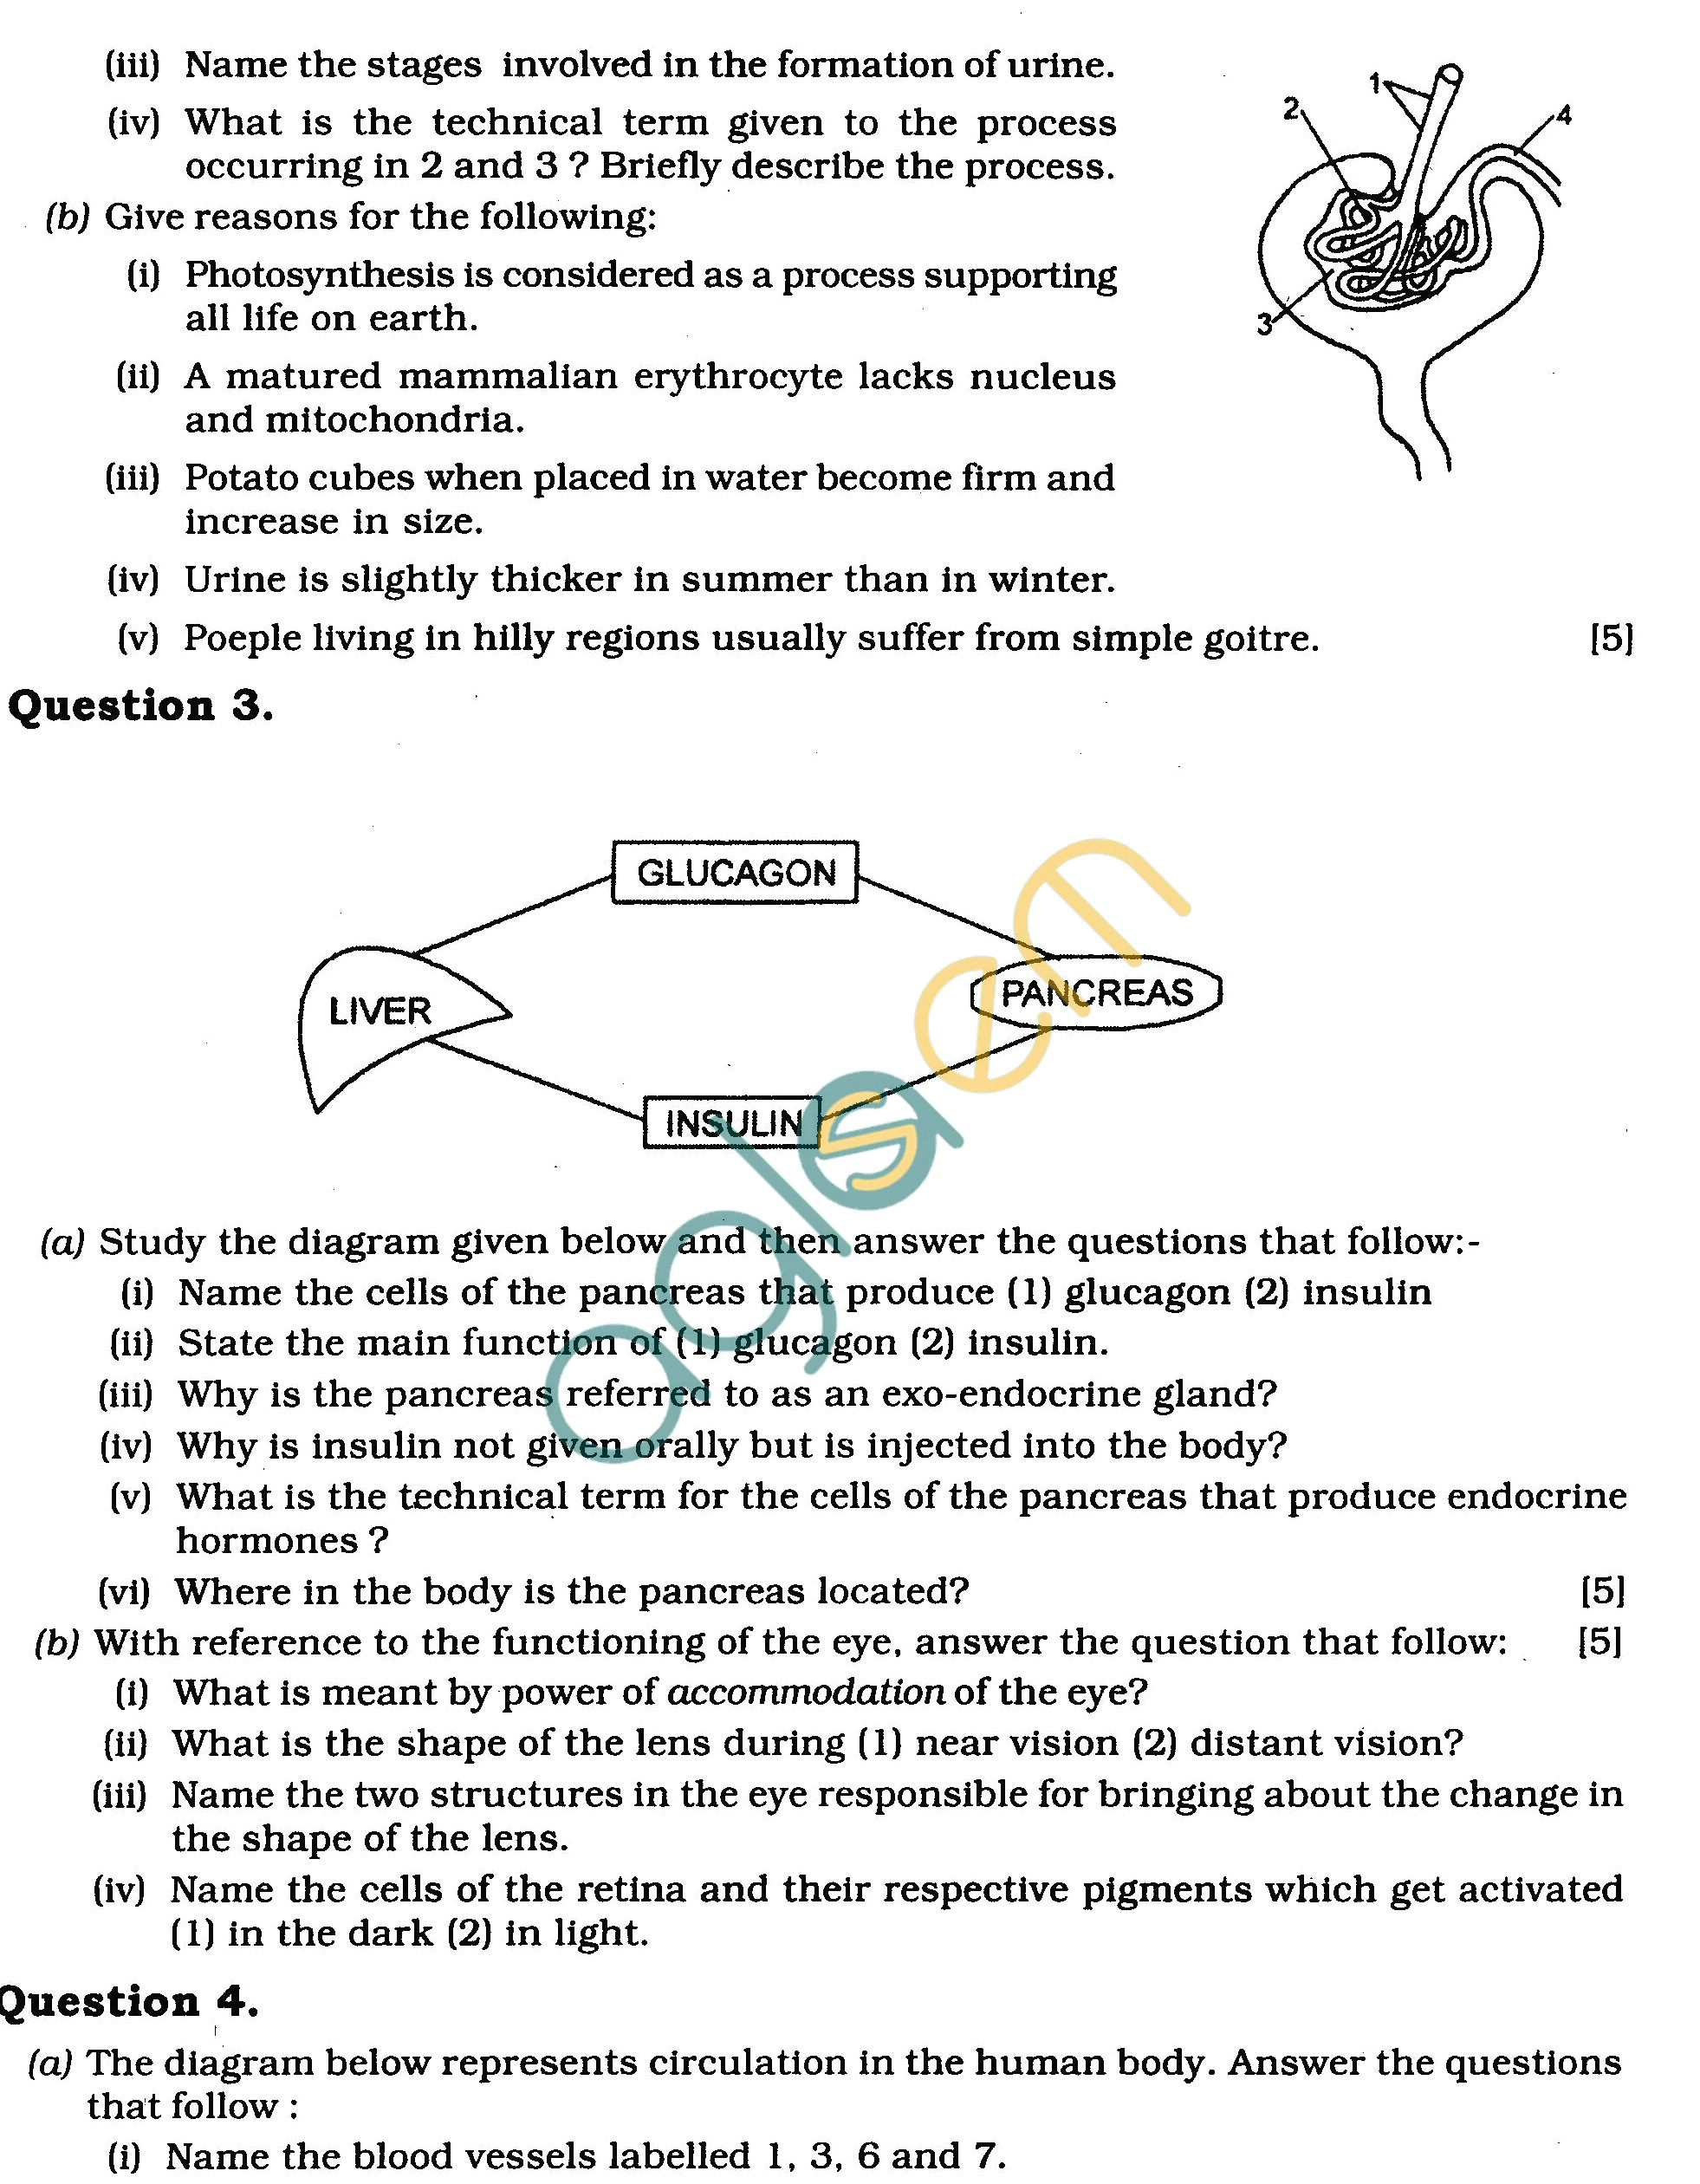 ICSE Class X Exam Question Papers 2011 Biology (Science Paper-3)